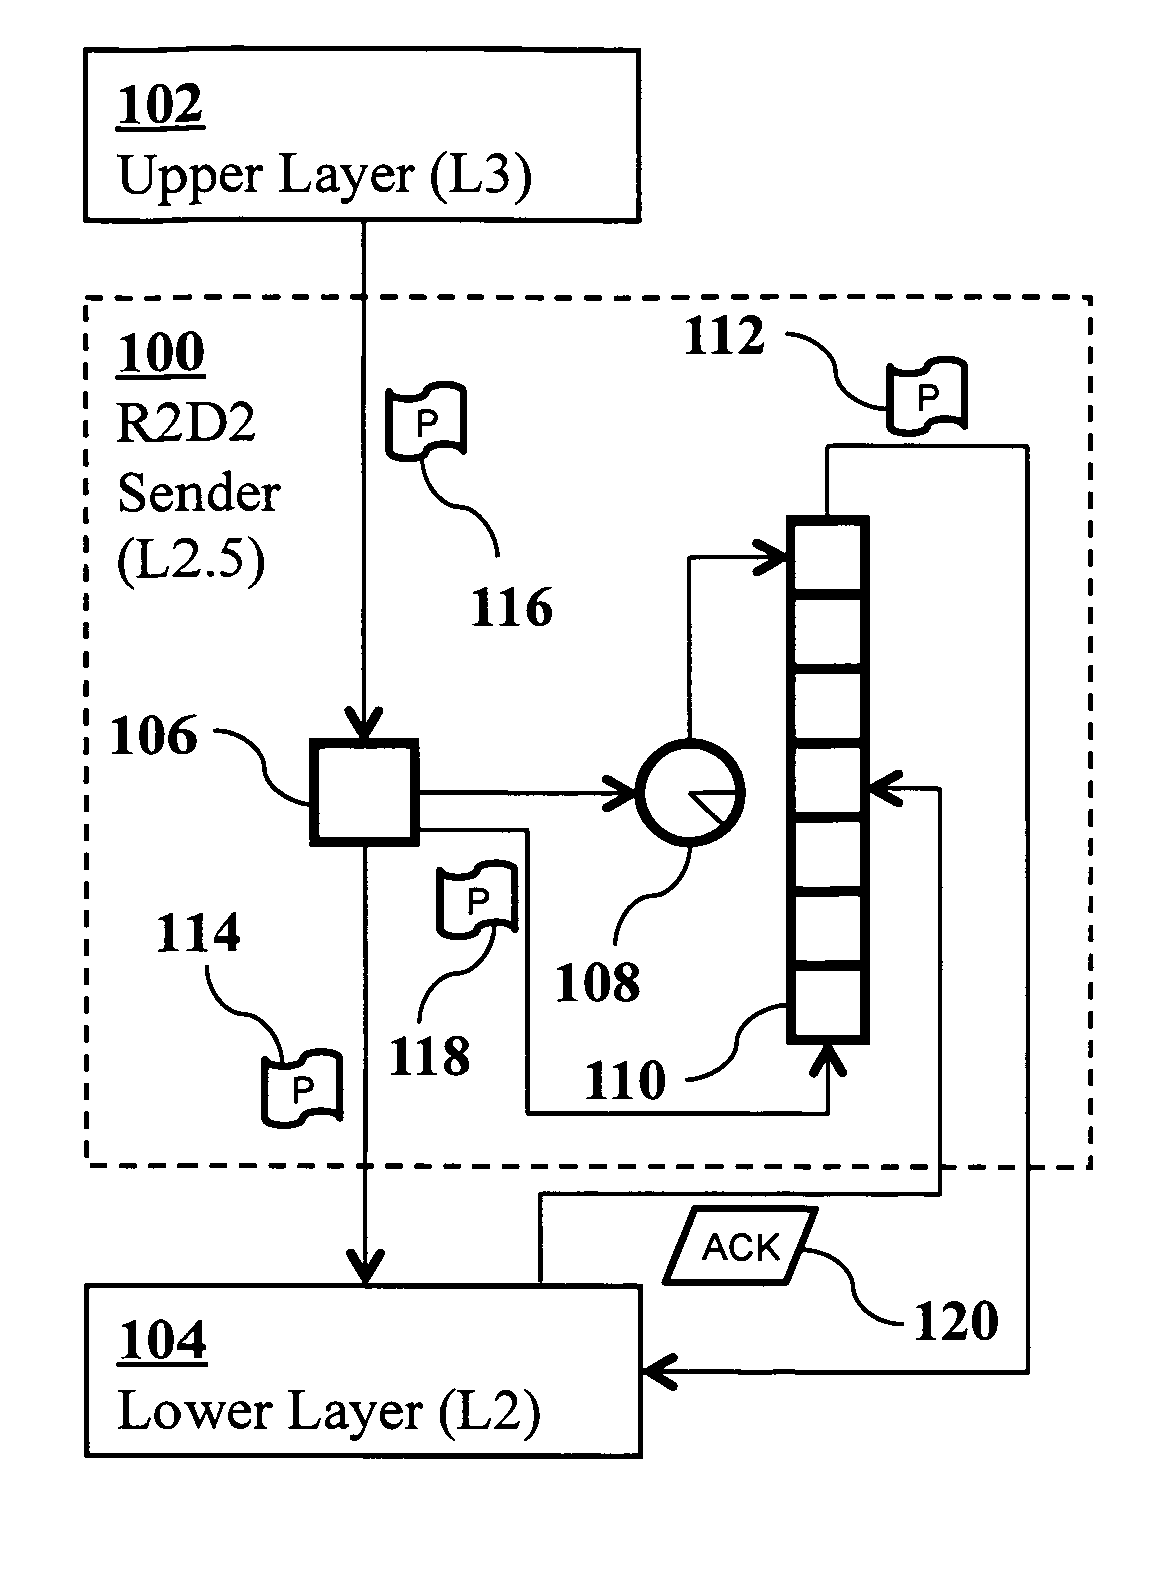 Method for reliable transport in data networks